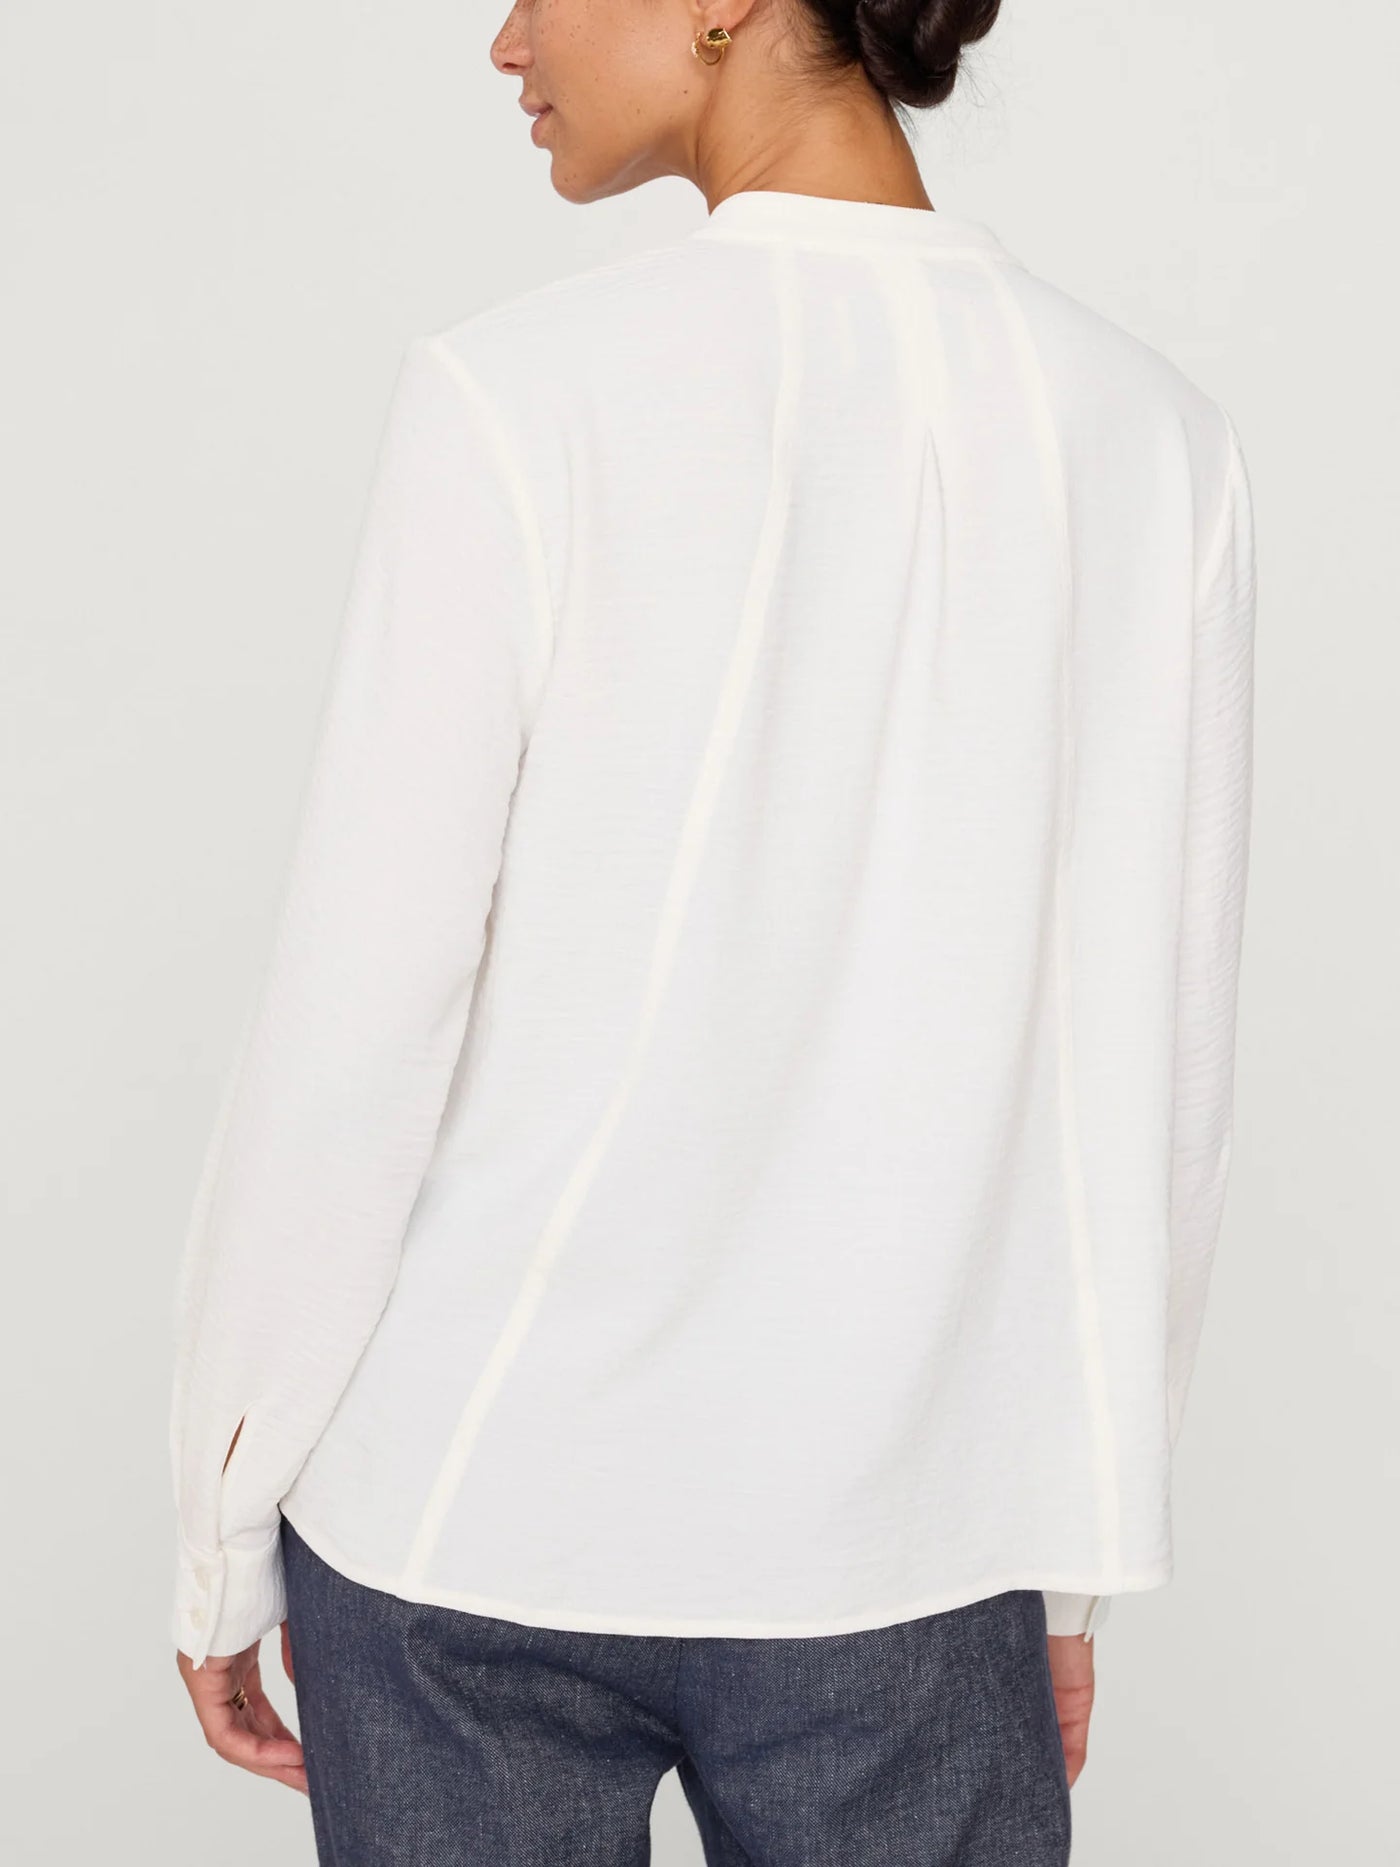 Galey Blouse in Salt White